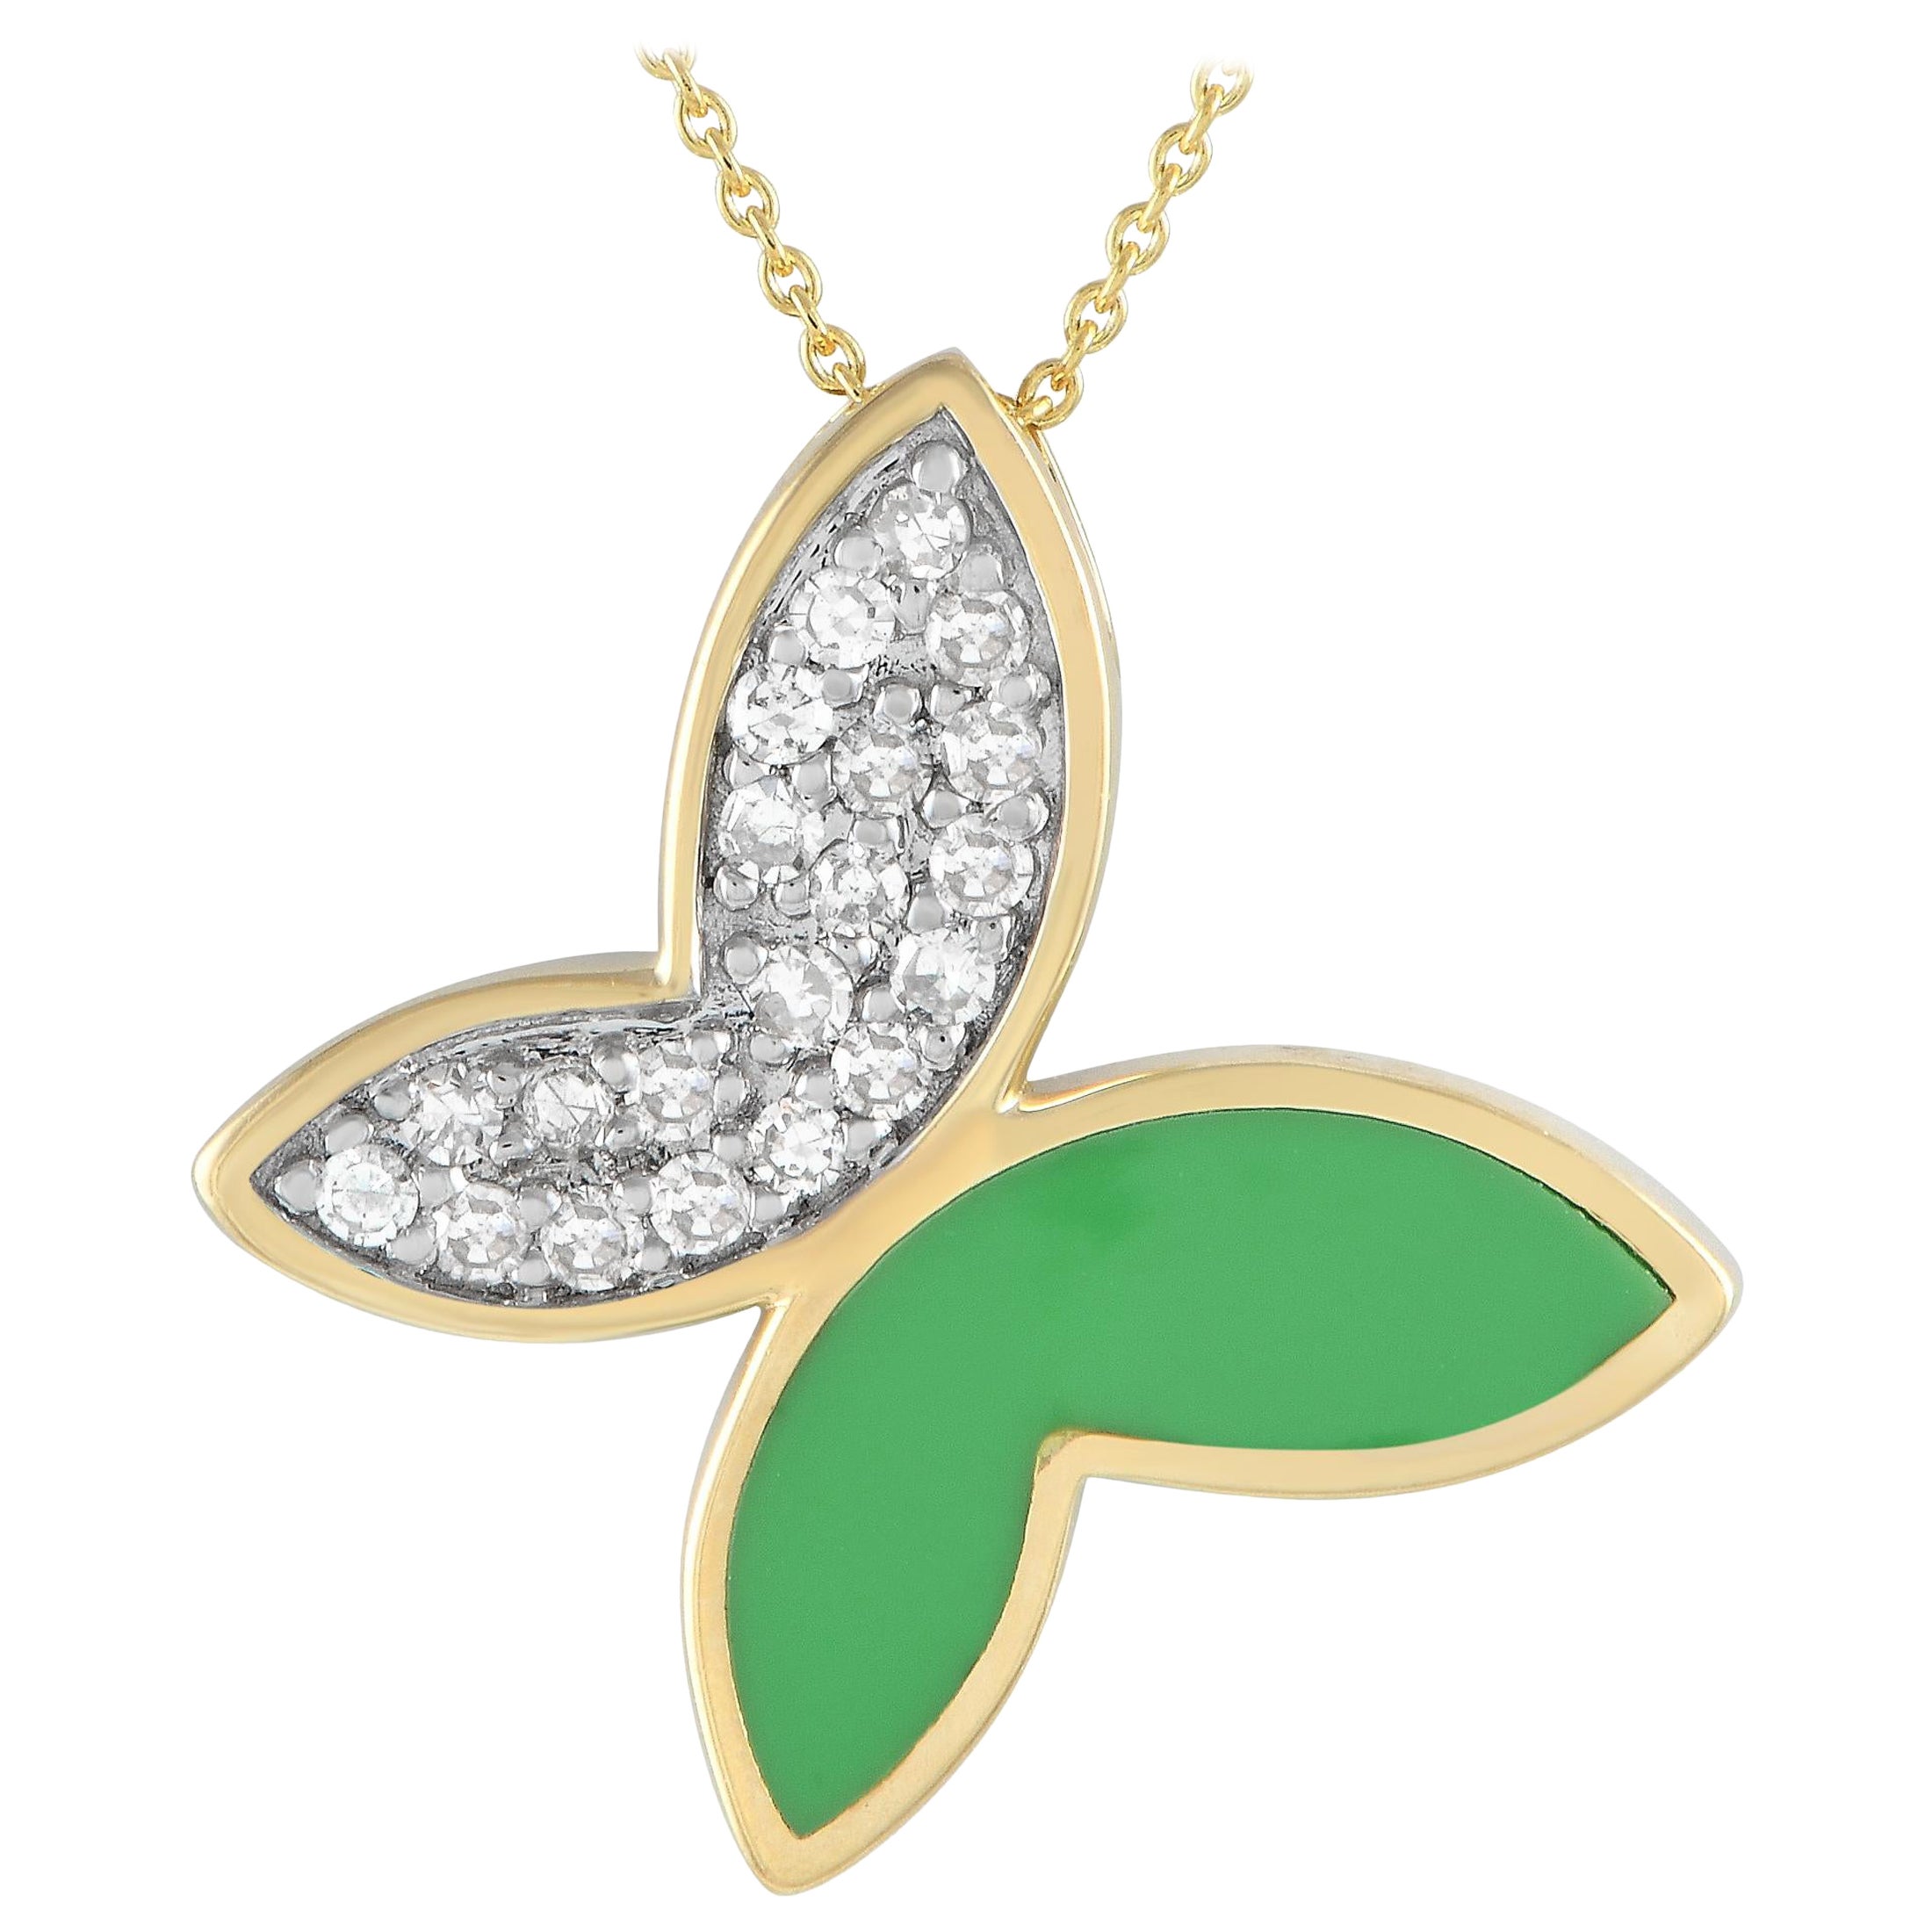 LB Exclusive 14K Yellow Gold 0.15ct Diamond Butterfly Pendant Necklace PN15064G For Sale